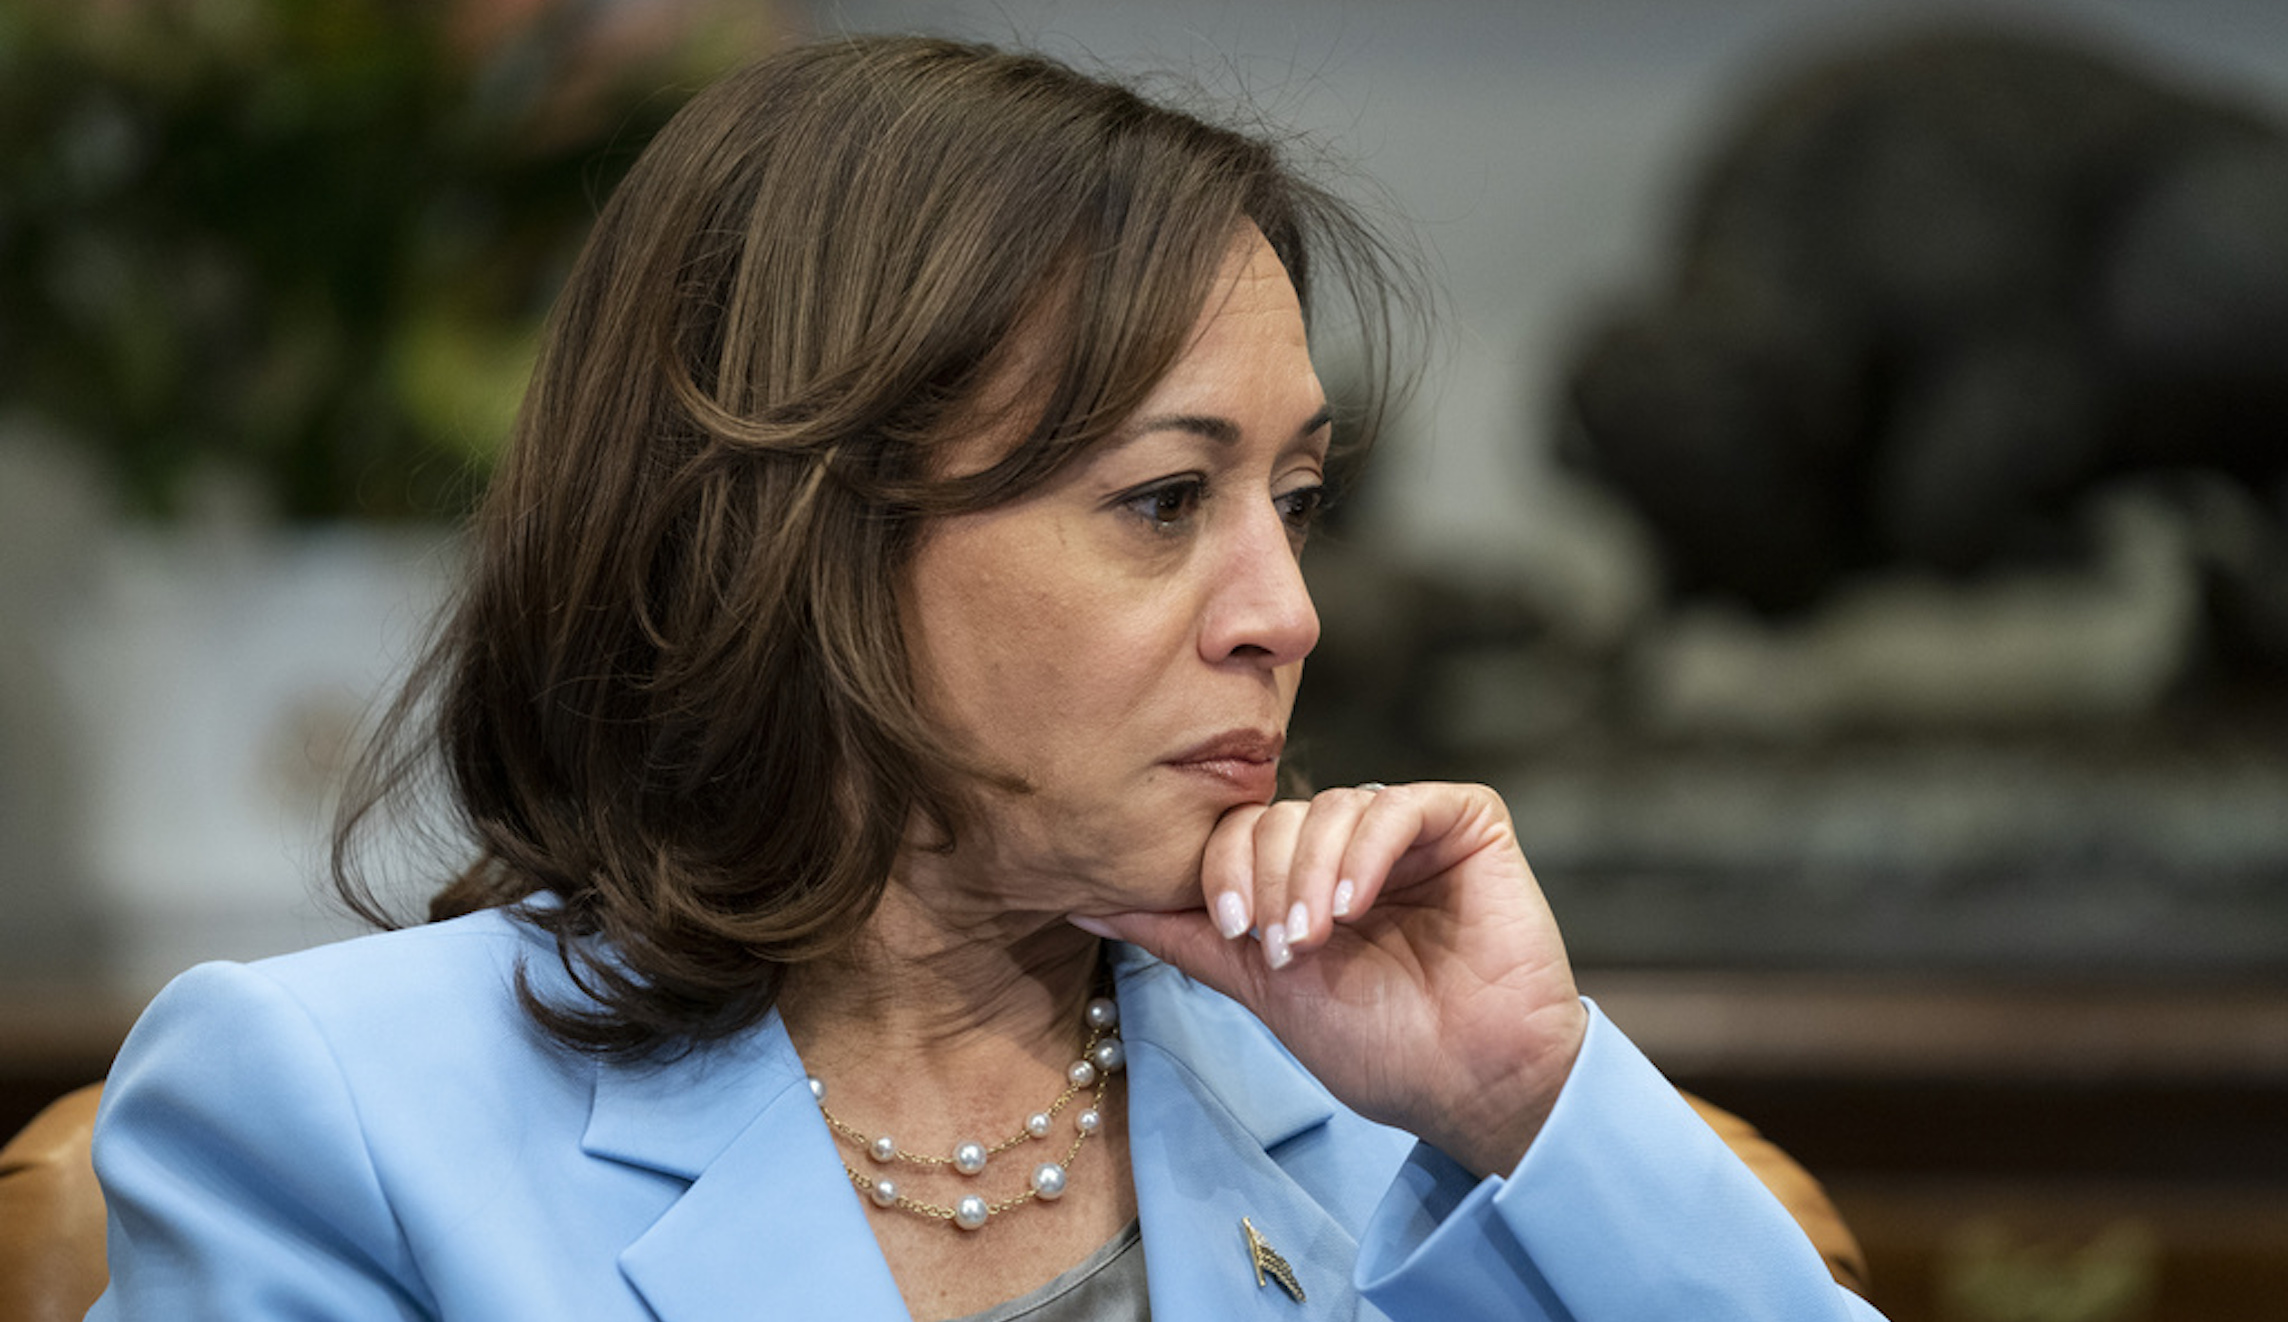 WATCH: Harris mistakenly credits nonexistent agency with approving mifepristone - Washington Examiner